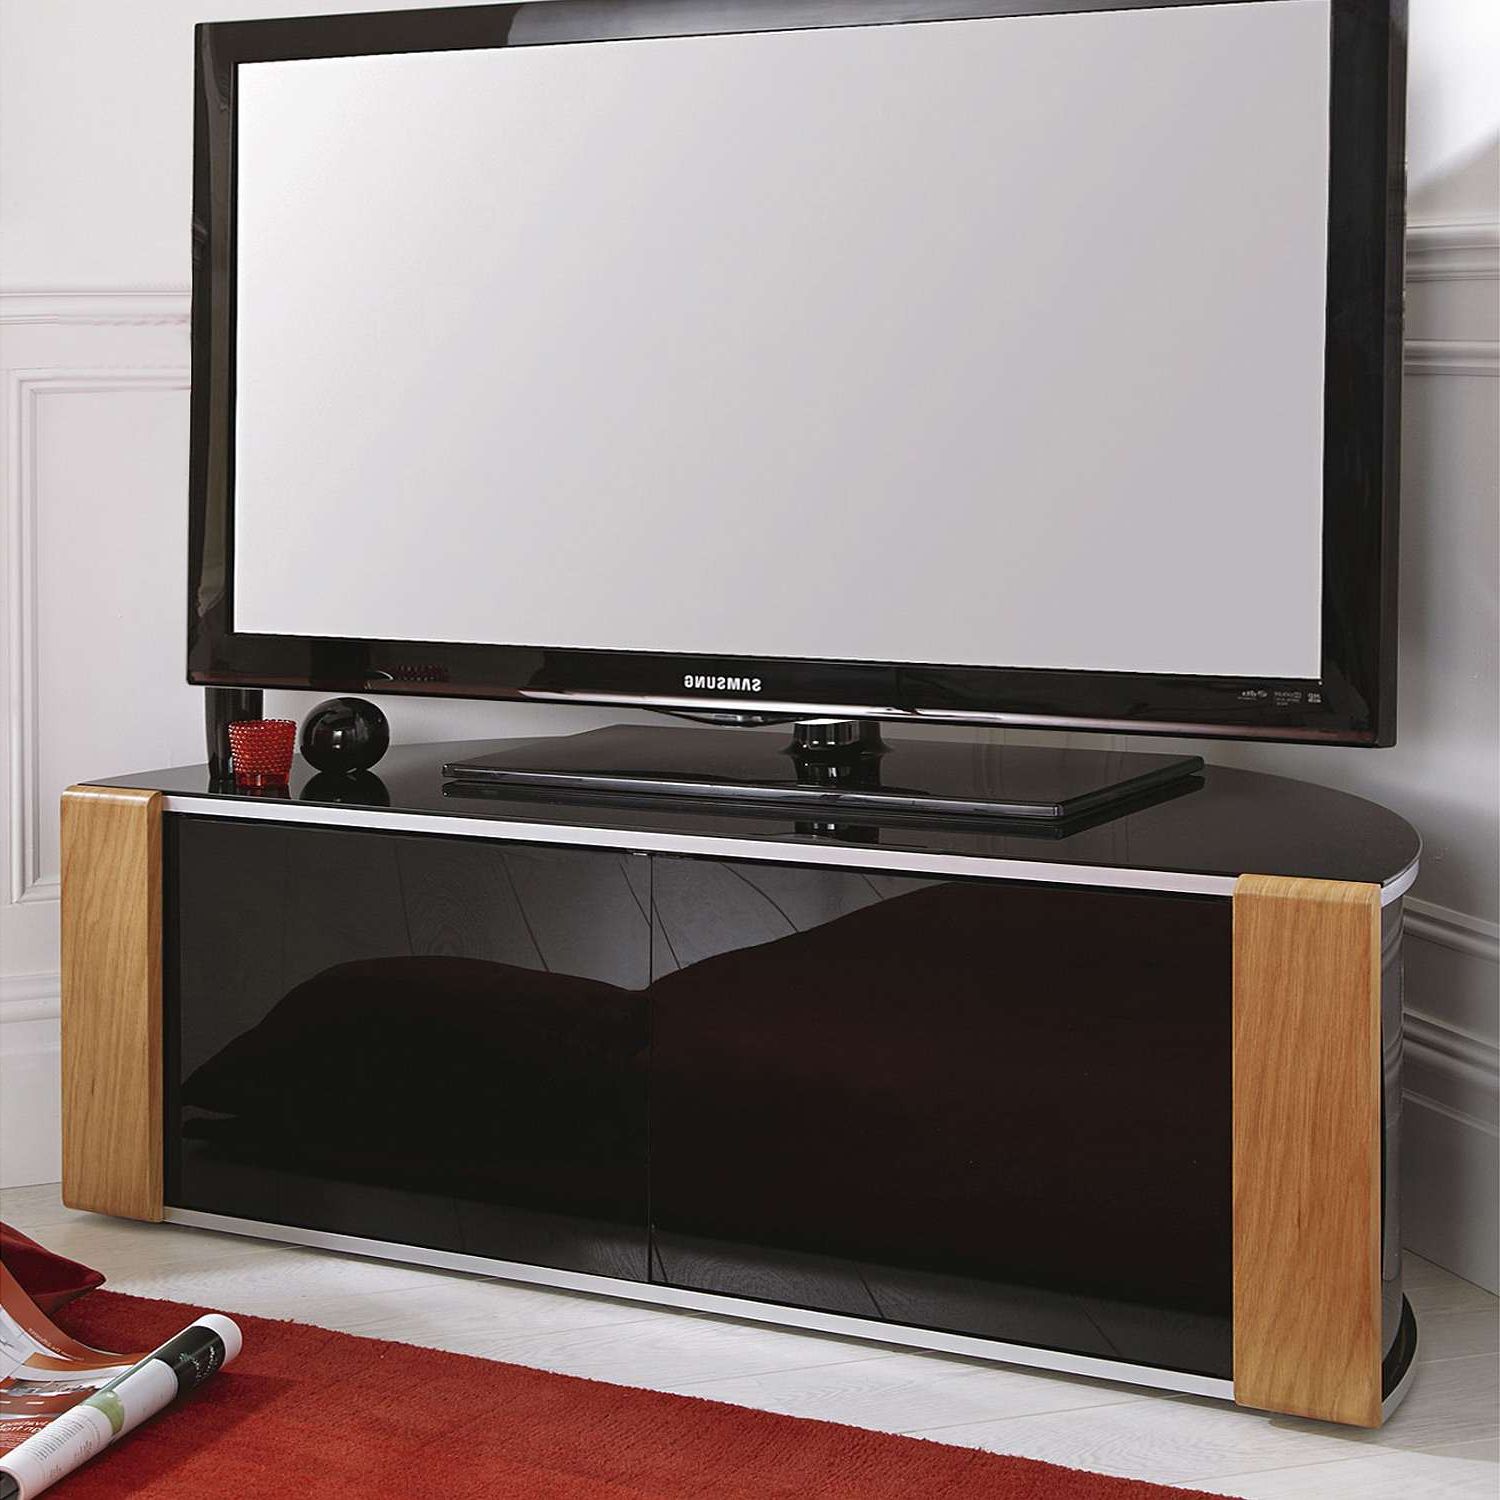 Most Recently Released Furniture: Interesting Corner Media Cabinet For Entertaining Room Tv With Regard To Corner Tv Unit With Glass Doors (View 17 of 20)